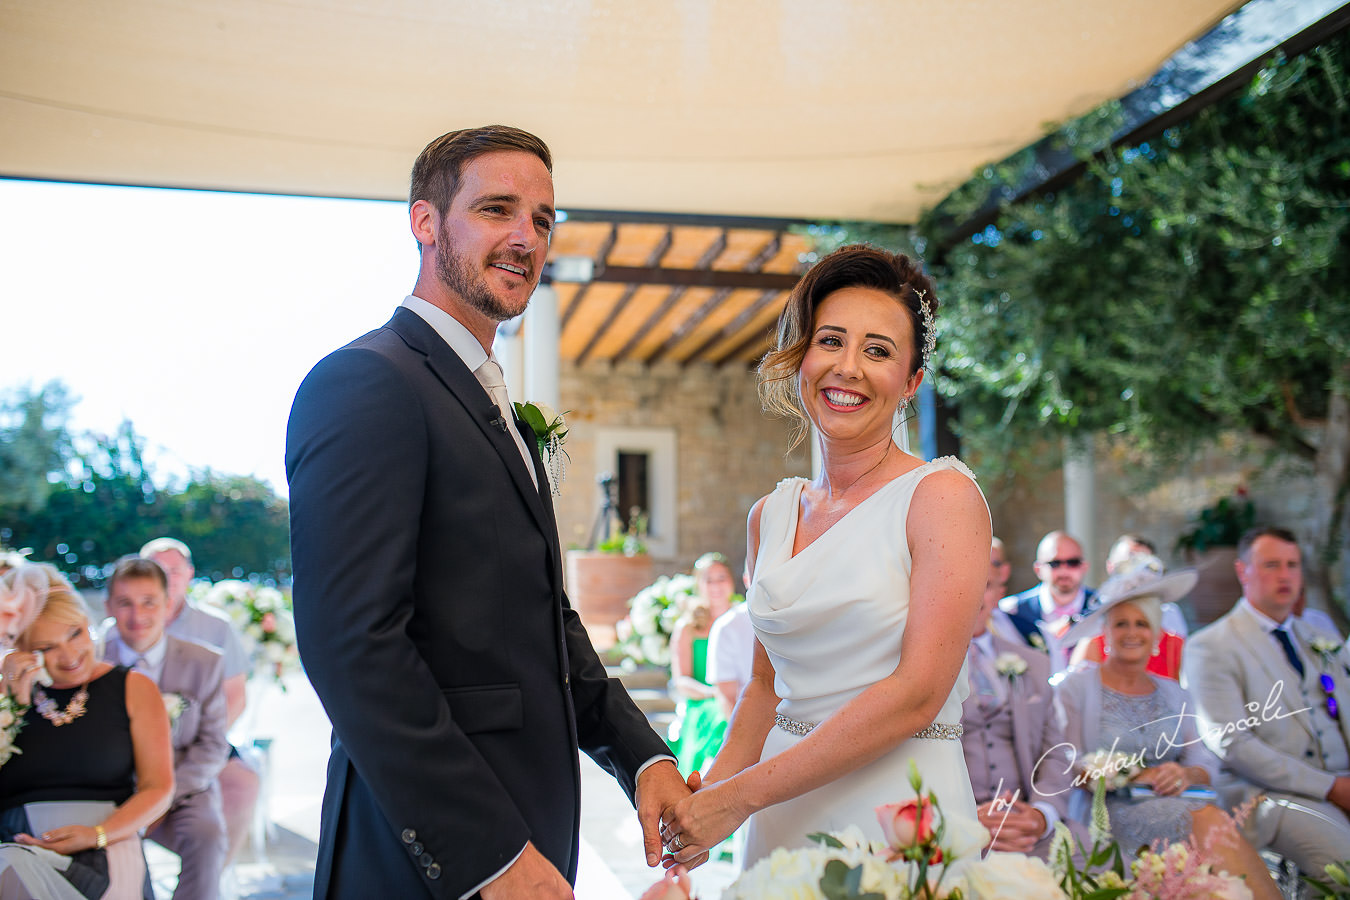 Laughing moments captured by Cristian Dascalu during an elegant Aphrodite Hills Wedding in Cyprus.